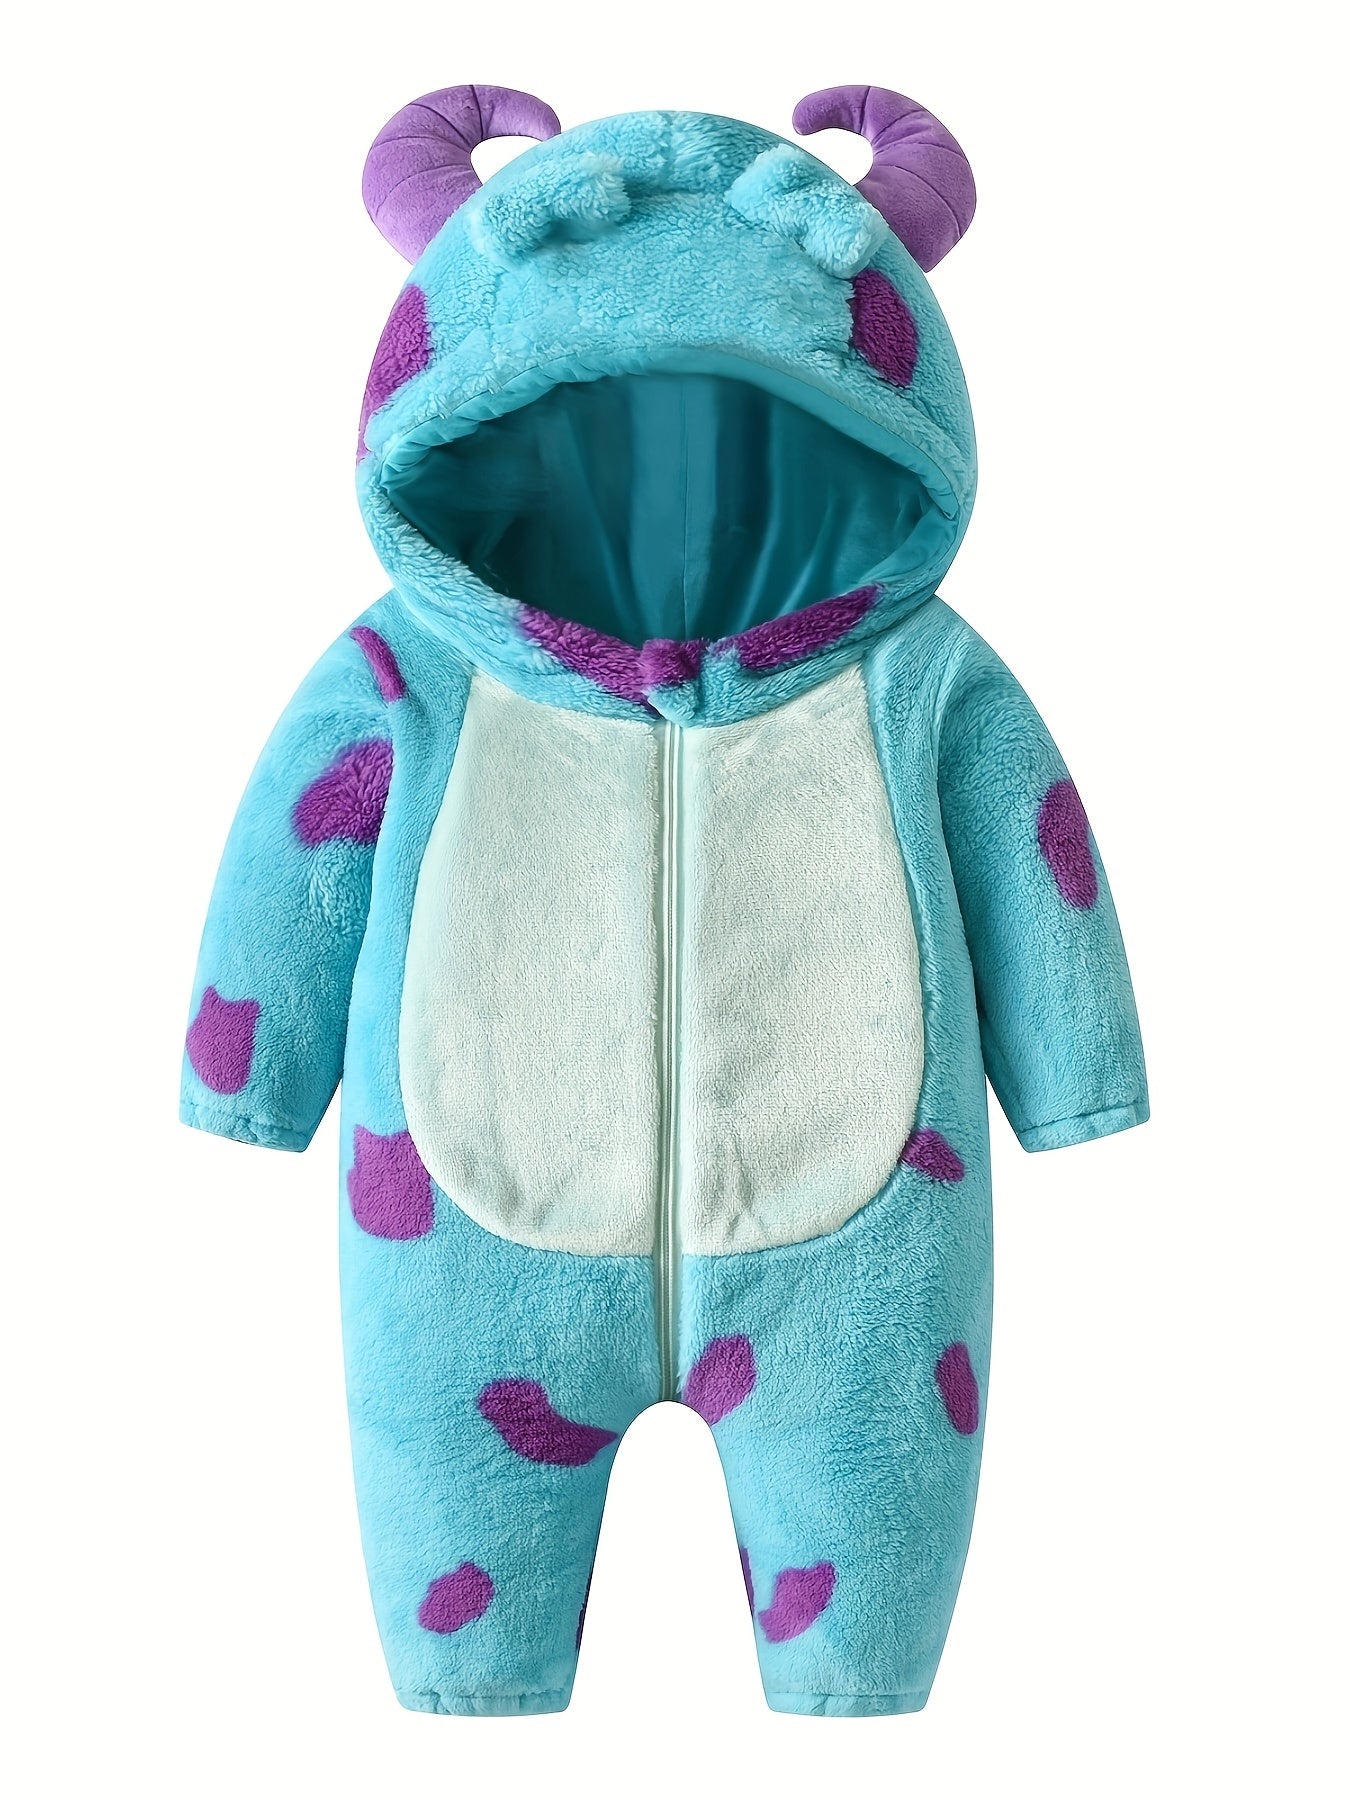 Little Monster Single Layer Cute Hooded  Bodysuit, Toddler Baby's Zip Up Party Cosplay Jumpsuit